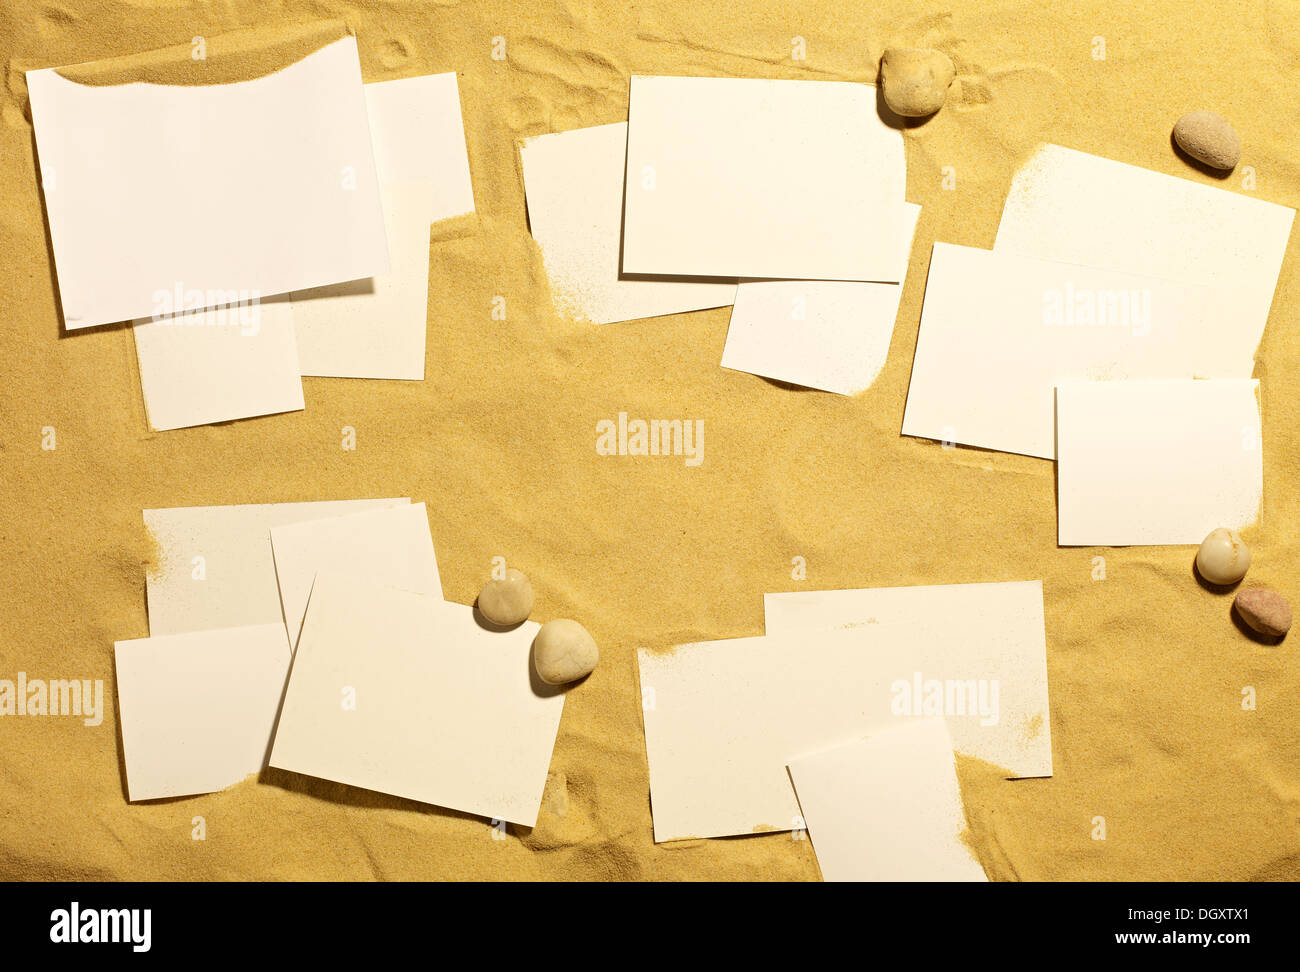 photo sized pieces of paper on a sandy beach Stock Photo